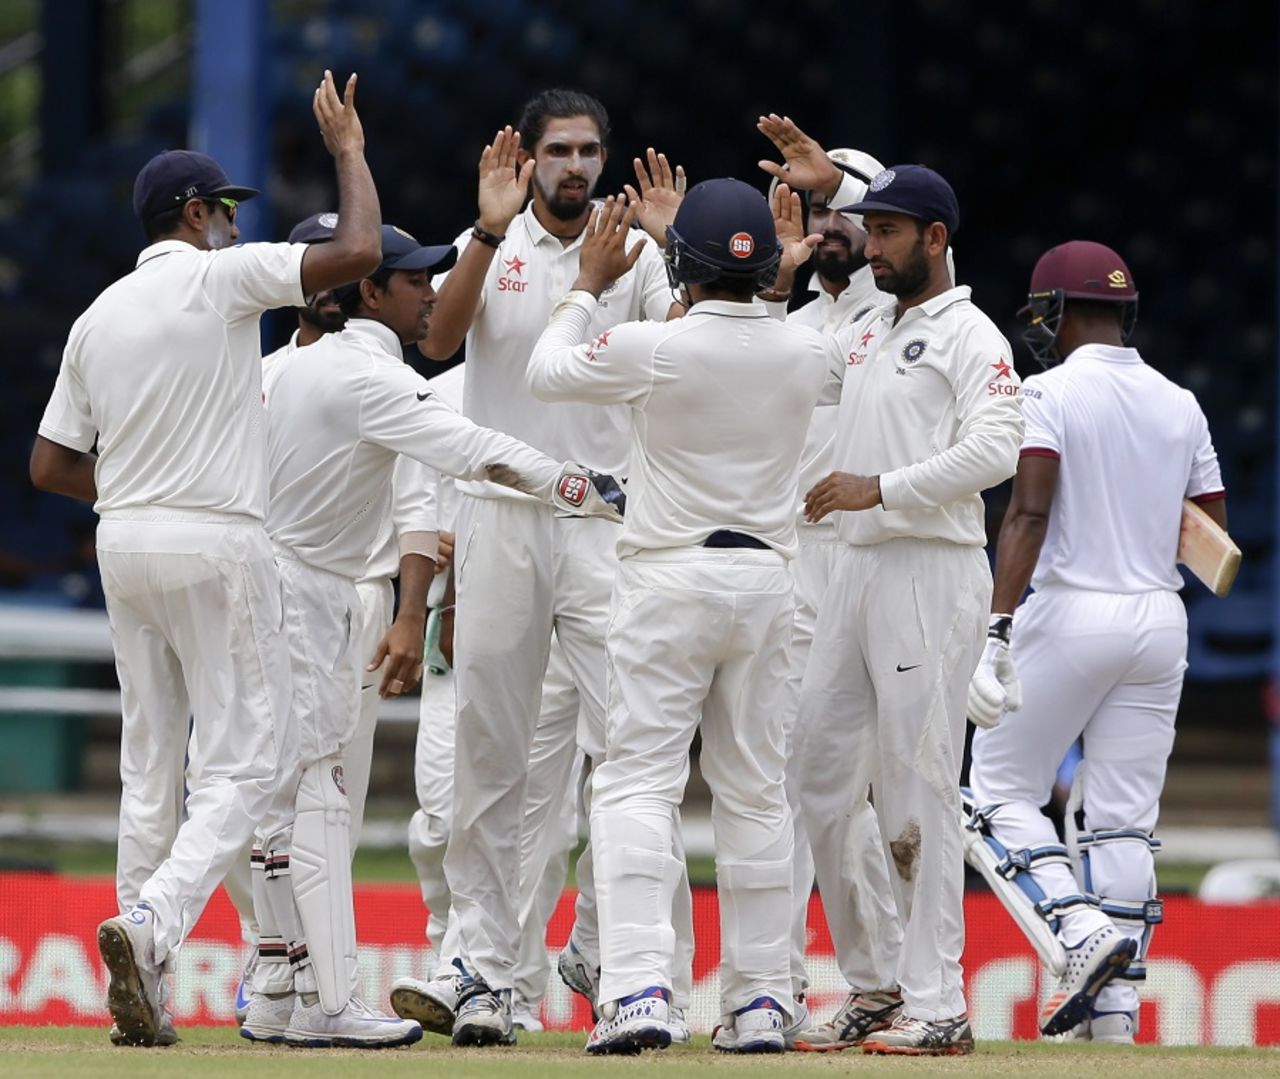 Ishant Sharma celebrates with team-mates after dismissing Leon Johnson early, West Indies v India, 4th Test, Port of Spain, 1st day, August 18, 2016